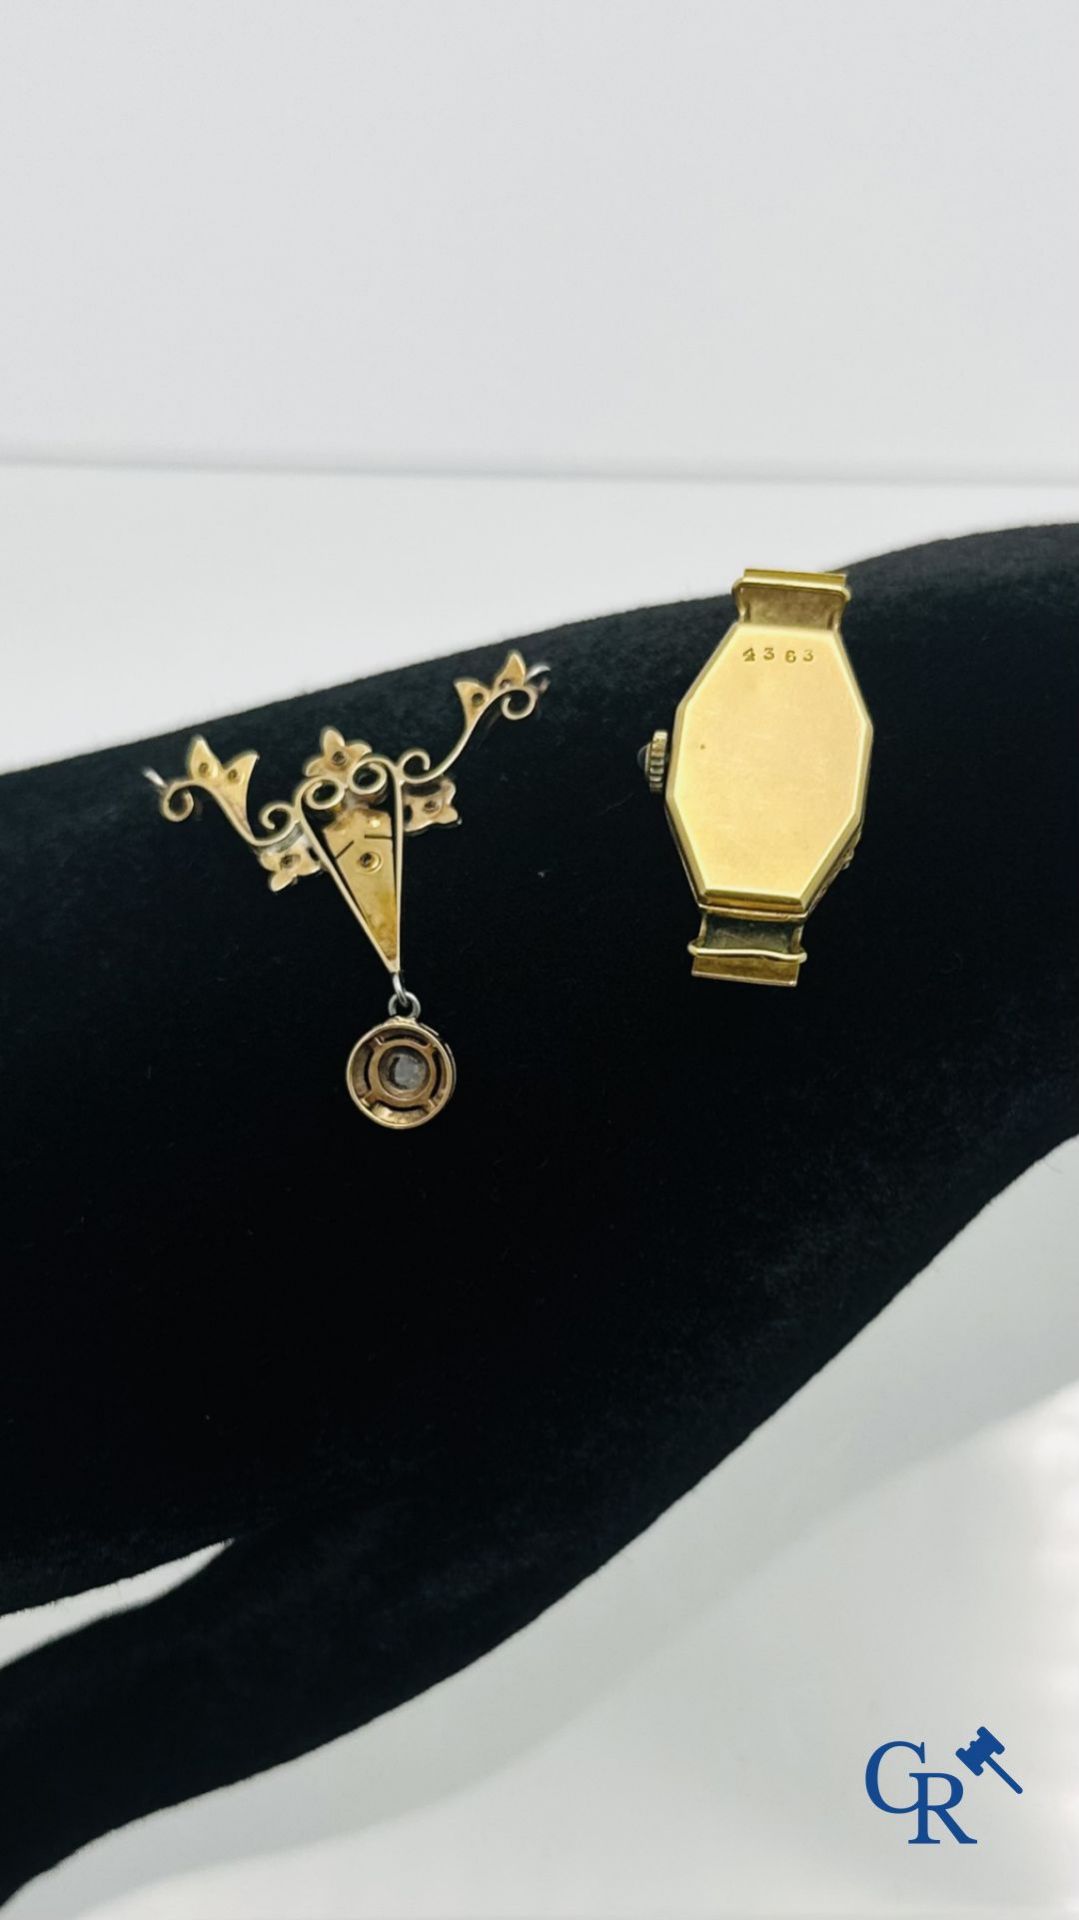 Jewellery: Lot consisting of a pendant in white gold 18K and an Art Deco ladies movement 18K. - Image 2 of 3